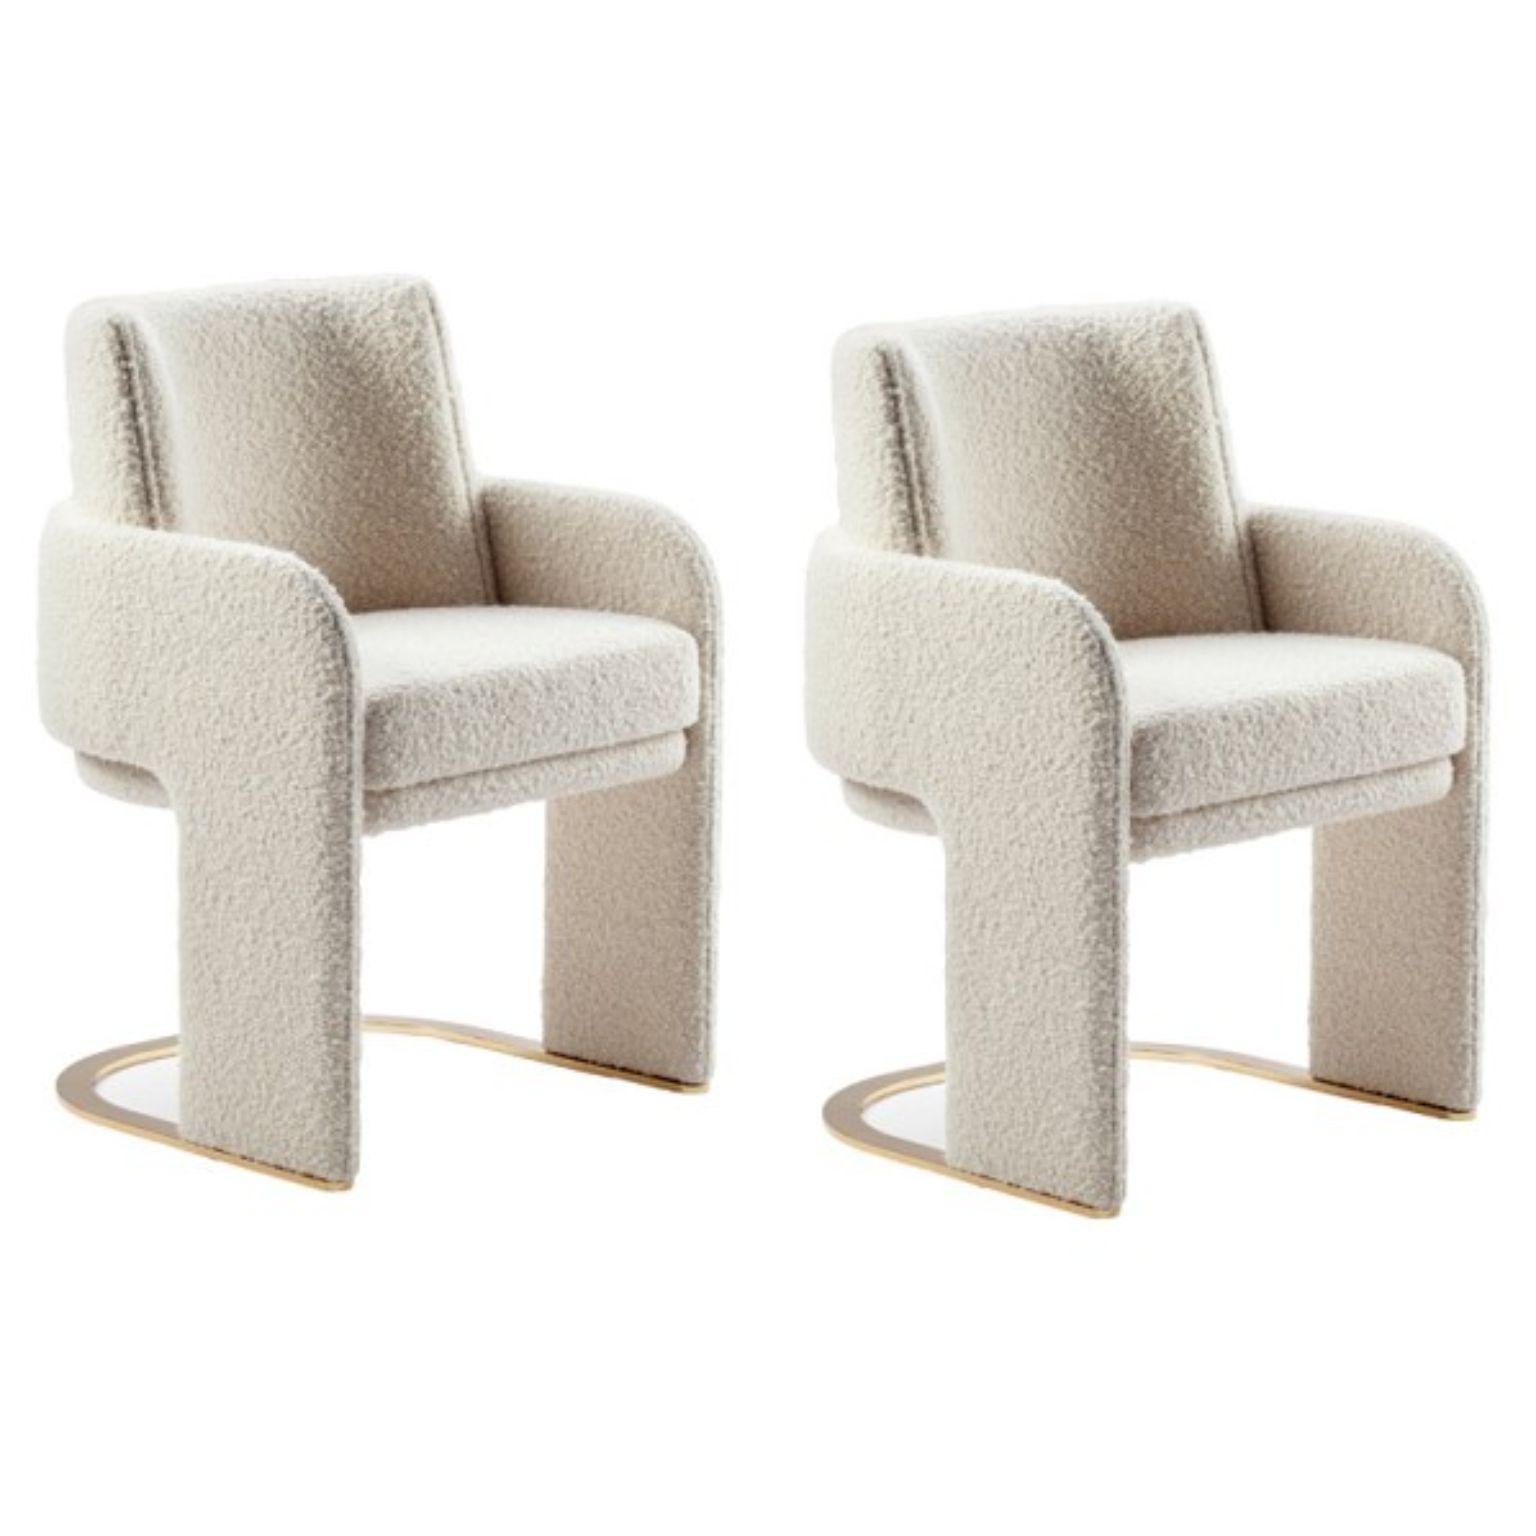 Set of 2 Bouclé Odisseia chairs by Dooq
Dimensions
W 54 x D 55 x H 85 x Seat H 48 cm

Materials & Finishes
Base and feet in stainless steel plated polished or satin: brass, copper or nickel. Upholstery: seat, armrests and back fully upholstered in